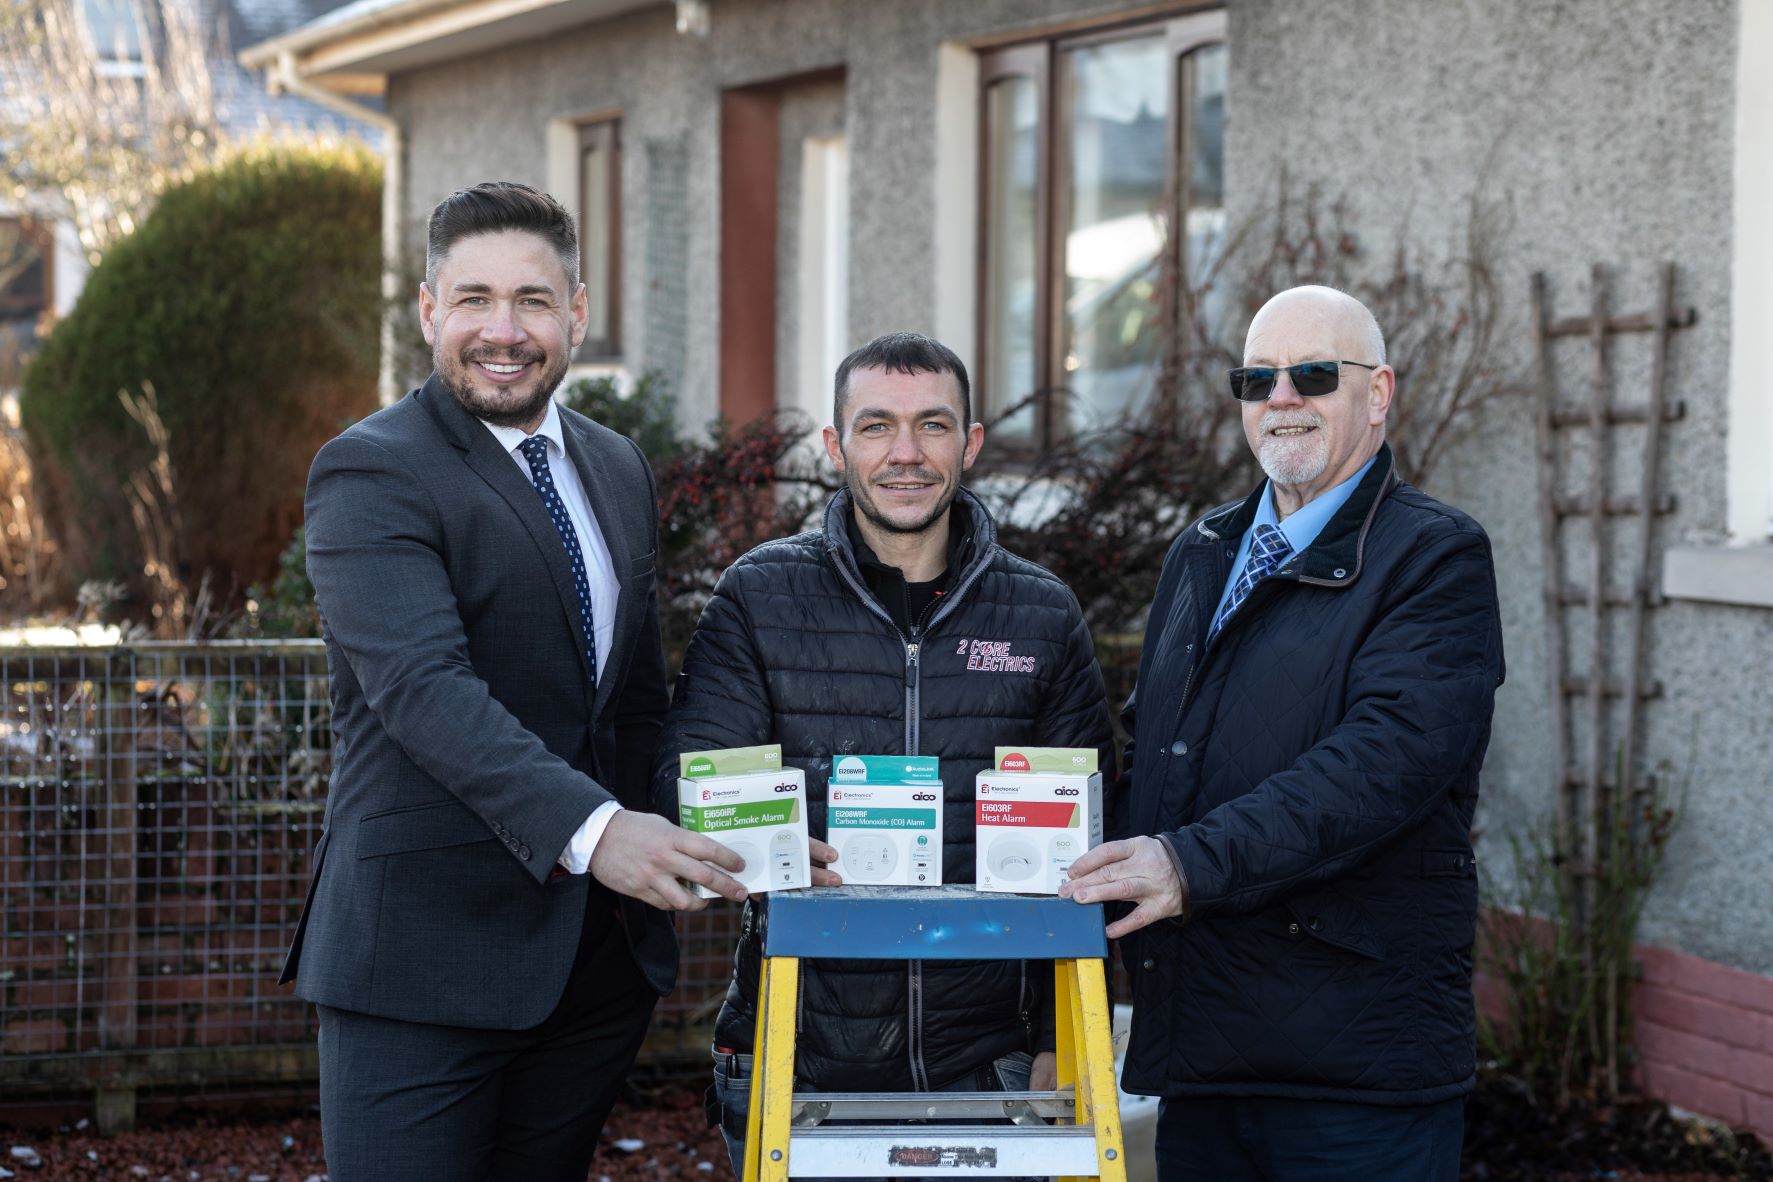 SELECT and Aico launch campaign to install free alarms for vulnerable householders